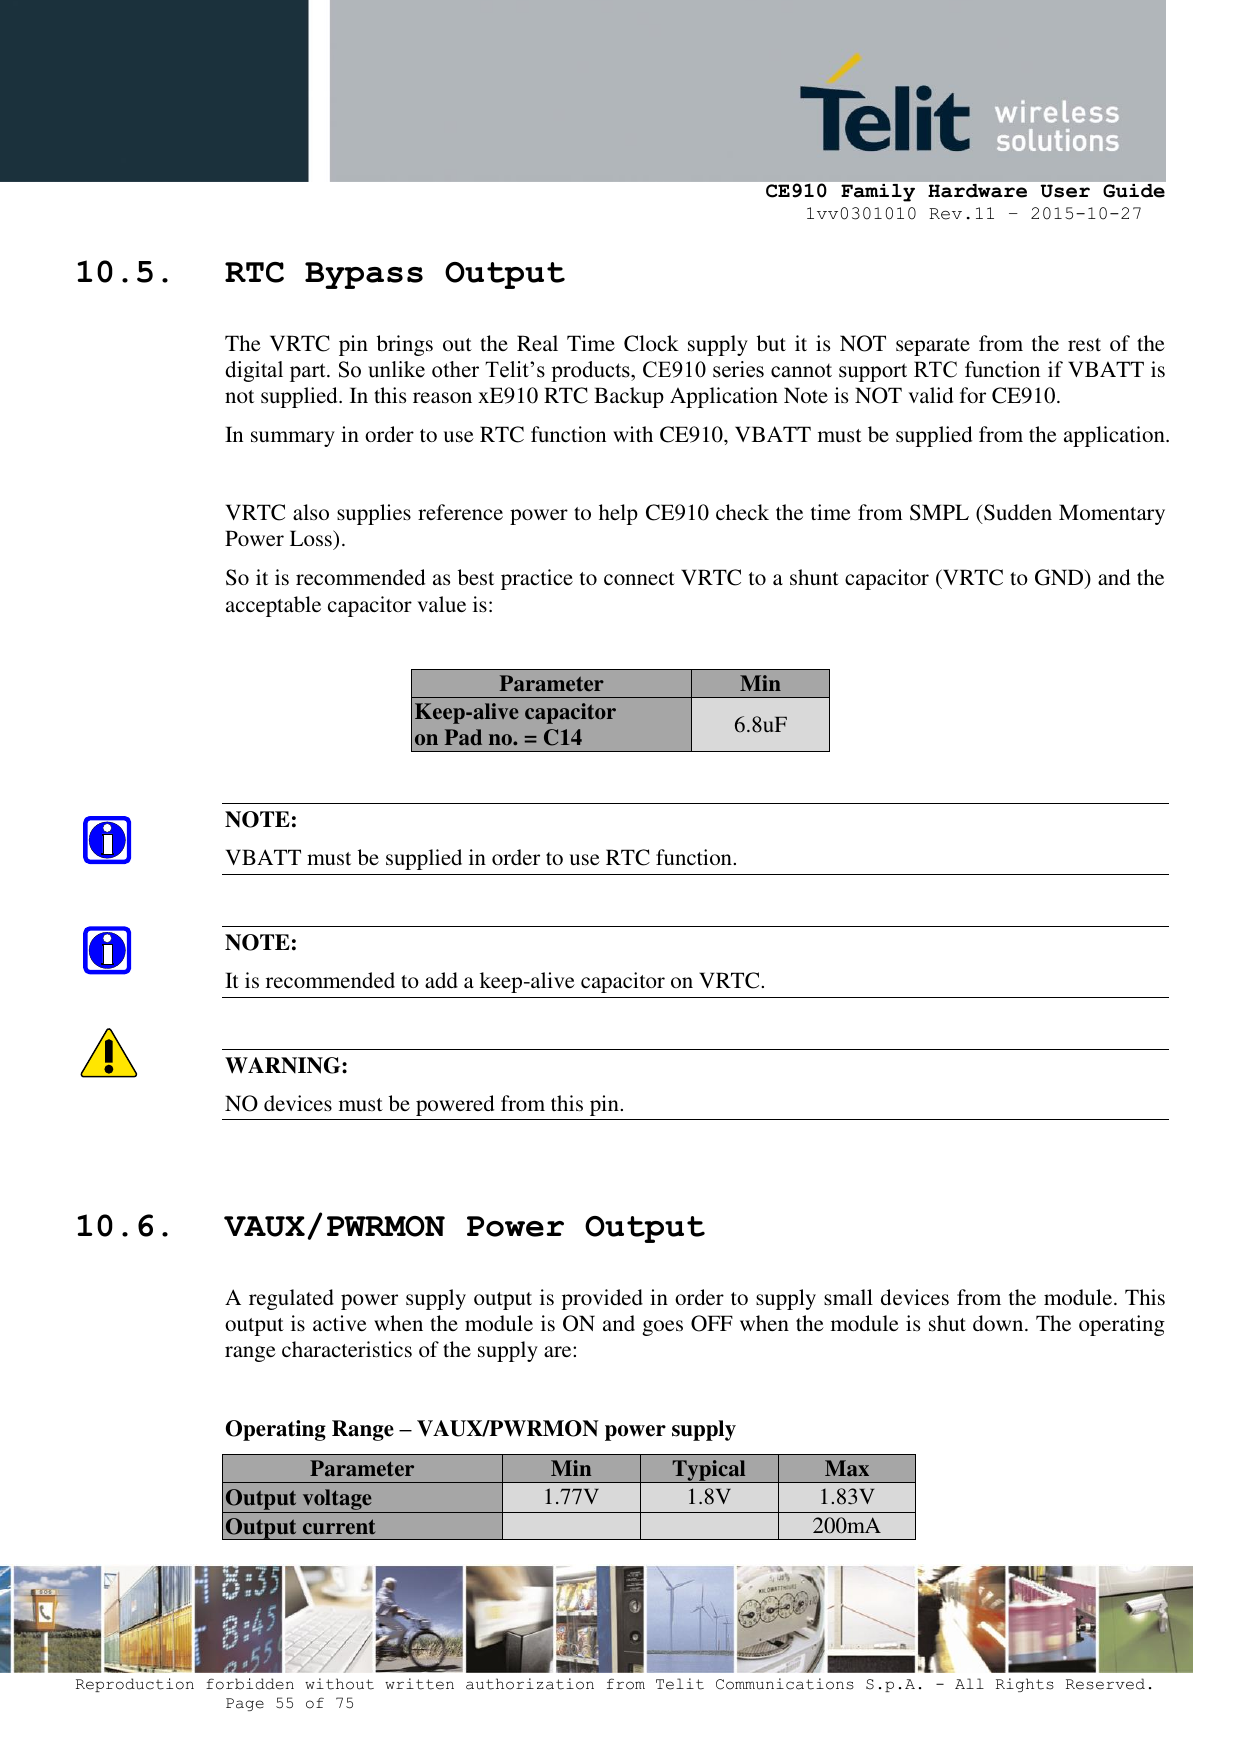     CE910 Family Hardware User Guide 1vv0301010 Rev.11 – 2015-10-27 Reproduction forbidden without written authorization from Telit Communications S.p.A. - All Rights Reserved.    Page 55 of 75                                                     10.5. RTC Bypass Output The VRTC pin brings out the Real Time Clock supply but it is NOT separate from the rest of the digital part. So unlike other Telit’s products, CE910 series cannot support RTC function if VBATT is not supplied. In this reason xE910 RTC Backup Application Note is NOT valid for CE910. In summary in order to use RTC function with CE910, VBATT must be supplied from the application.  VRTC also supplies reference power to help CE910 check the time from SMPL (Sudden Momentary Power Loss). So it is recommended as best practice to connect VRTC to a shunt capacitor (VRTC to GND) and the acceptable capacitor value is:  Parameter Min Keep-alive capacitor  on Pad no. = C14 6.8uF  NOTE: VBATT must be supplied in order to use RTC function.  NOTE: It is recommended to add a keep-alive capacitor on VRTC.  WARNING: NO devices must be powered from this pin.  10.6. VAUX/PWRMON Power Output A regulated power supply output is provided in order to supply small devices from the module. This output is active when the module is ON and goes OFF when the module is shut down. The operating range characteristics of the supply are:  Operating Range – VAUX/PWRMON power supply Parameter Min Typical Max Output voltage 1.77V 1.8V 1.83V Output current   200mA 